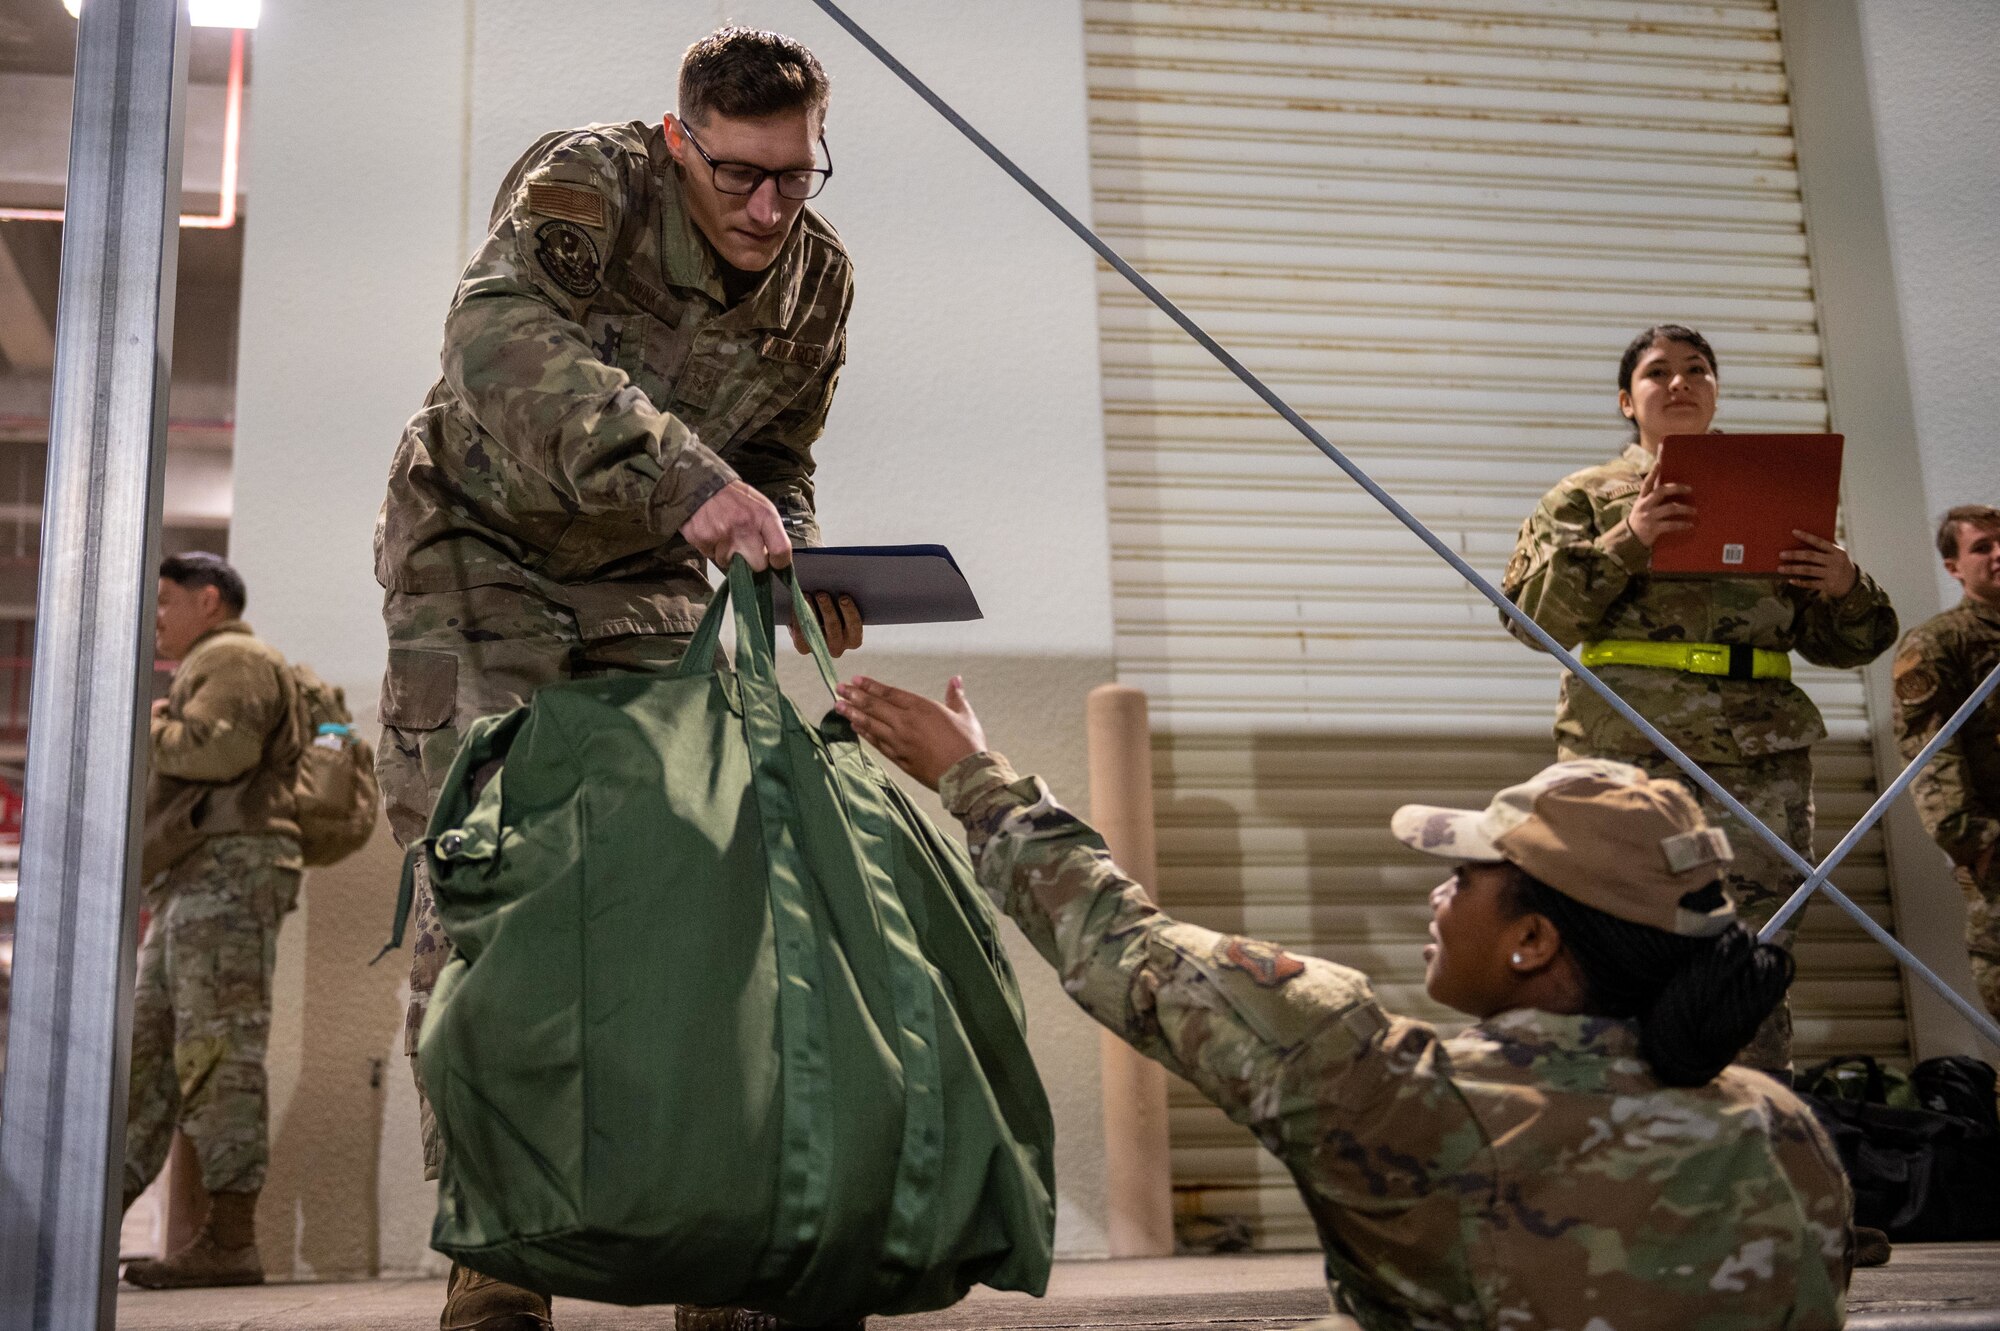 Airman hands green bag to another Airman